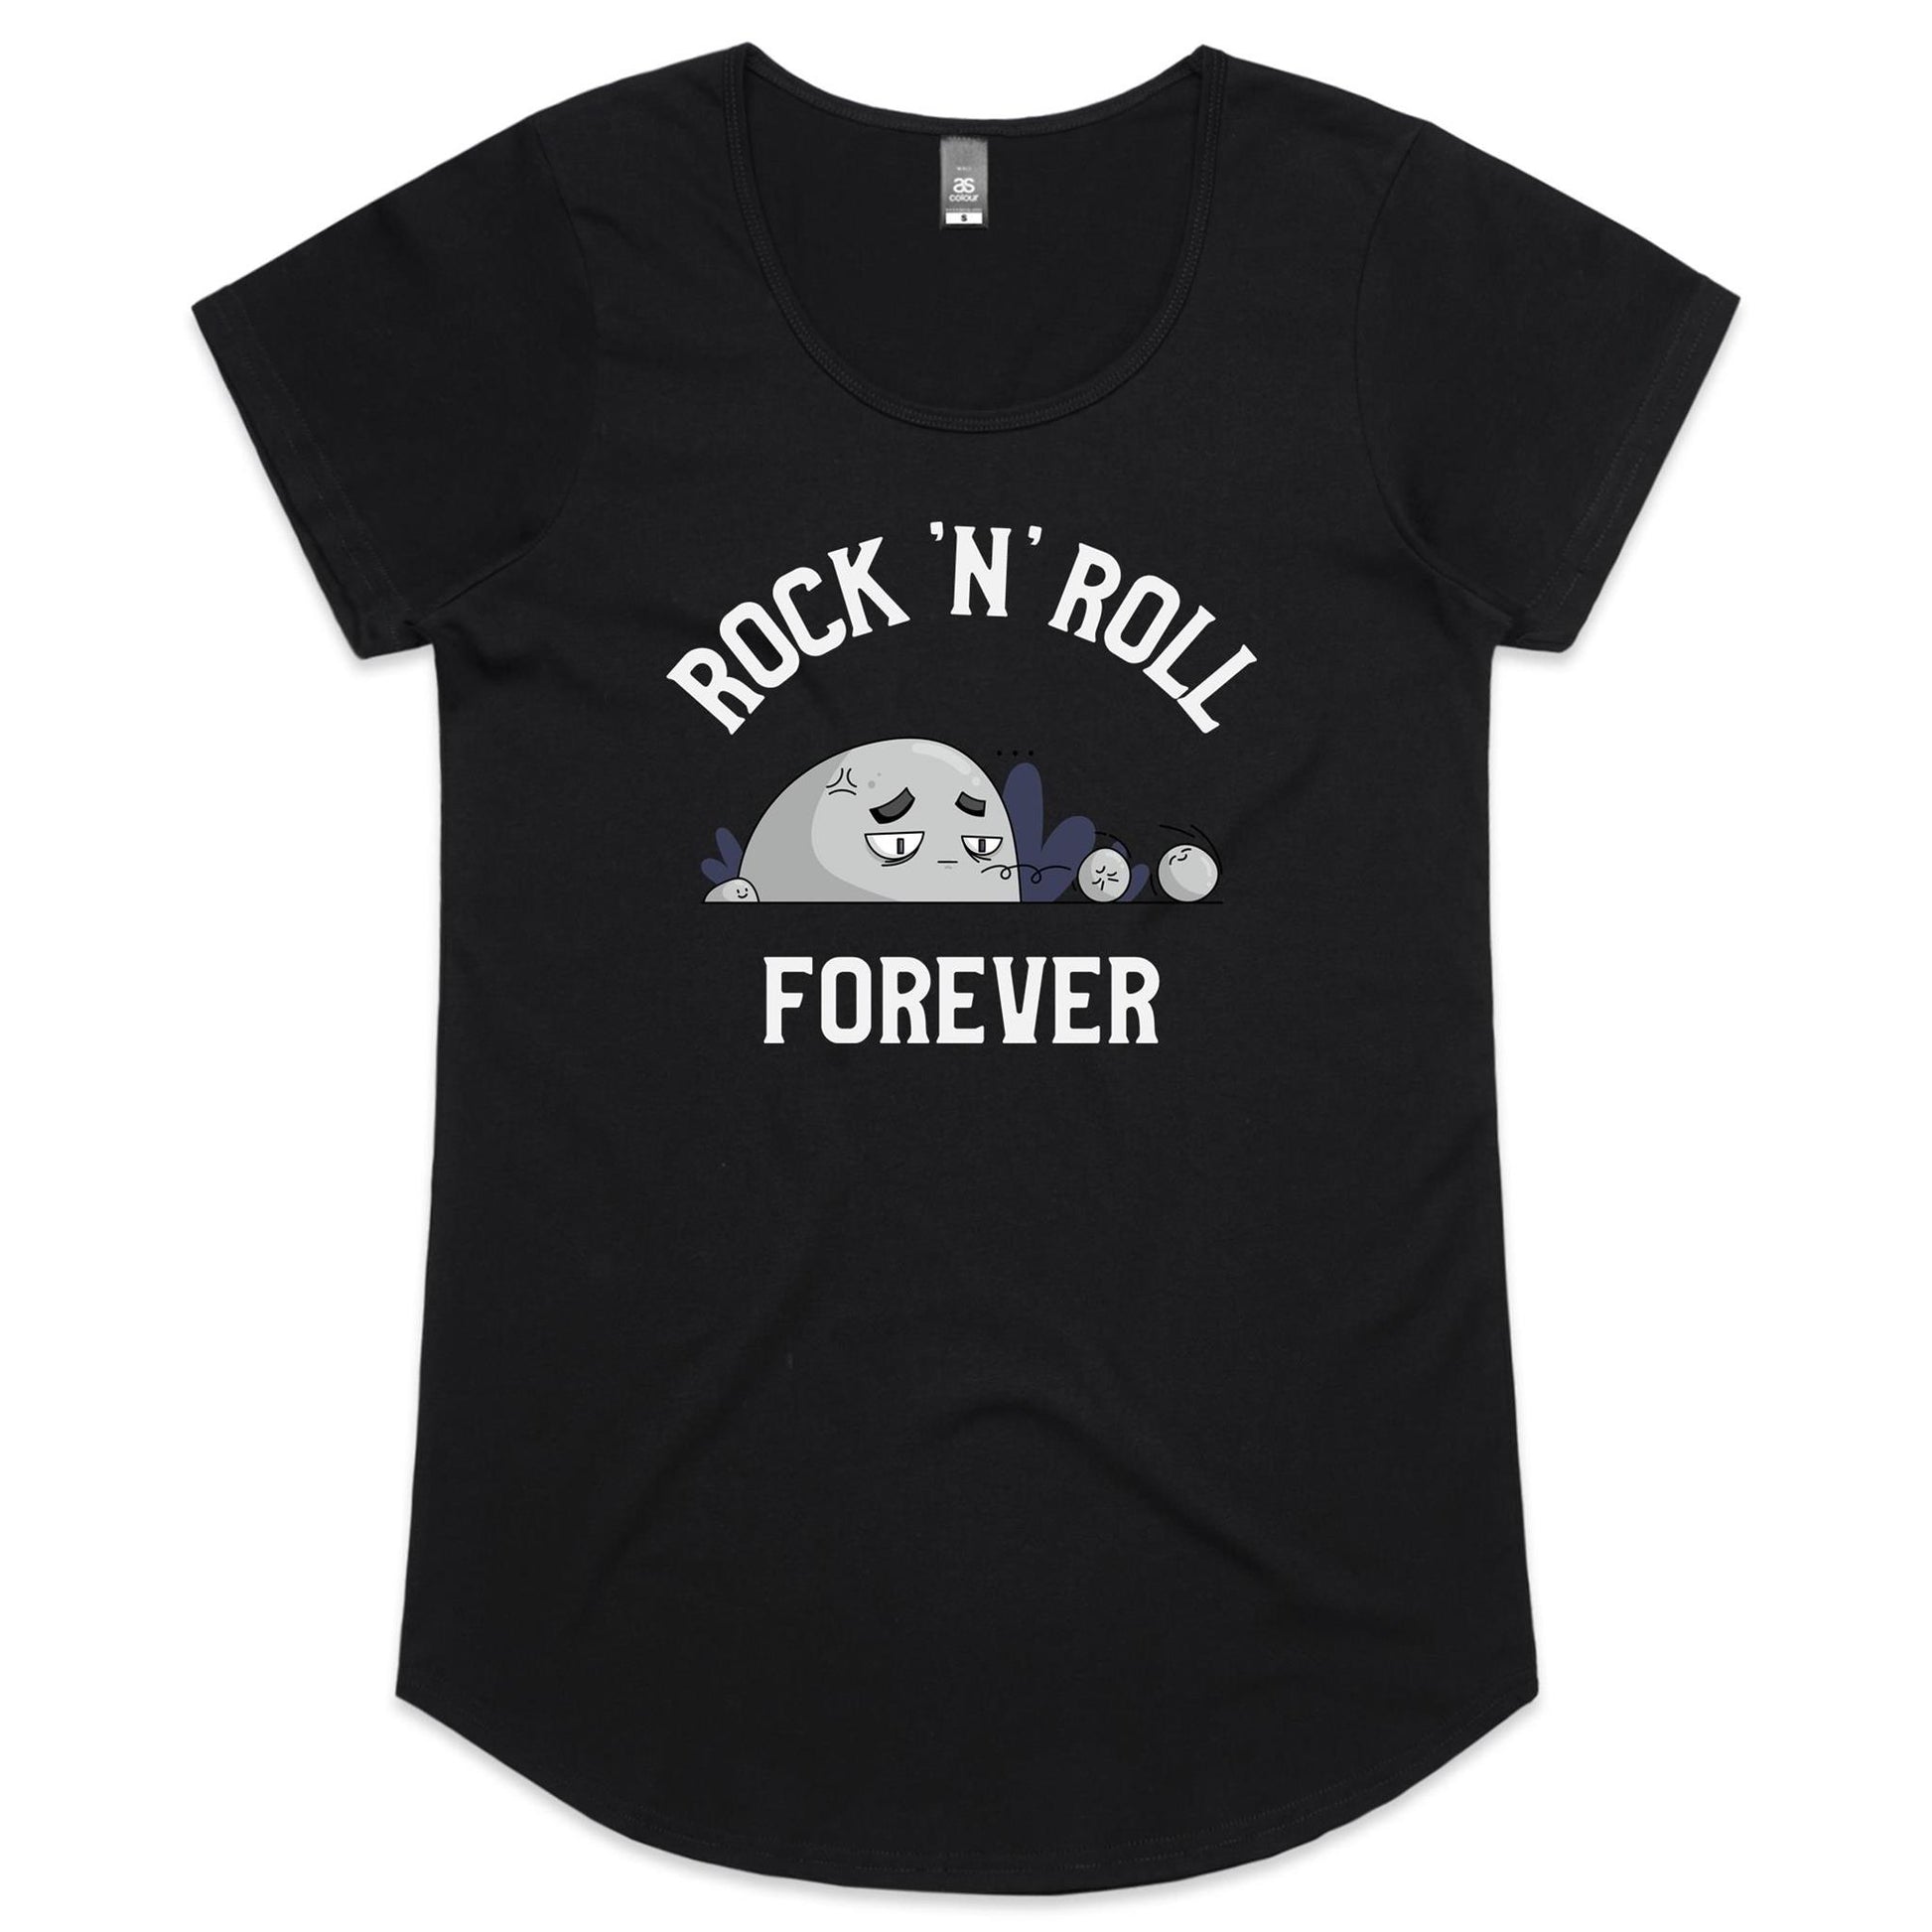 Rock 'N' Roll Forever - Womens Scoop Neck T-Shirt Black Womens Scoop Neck T-shirt Music